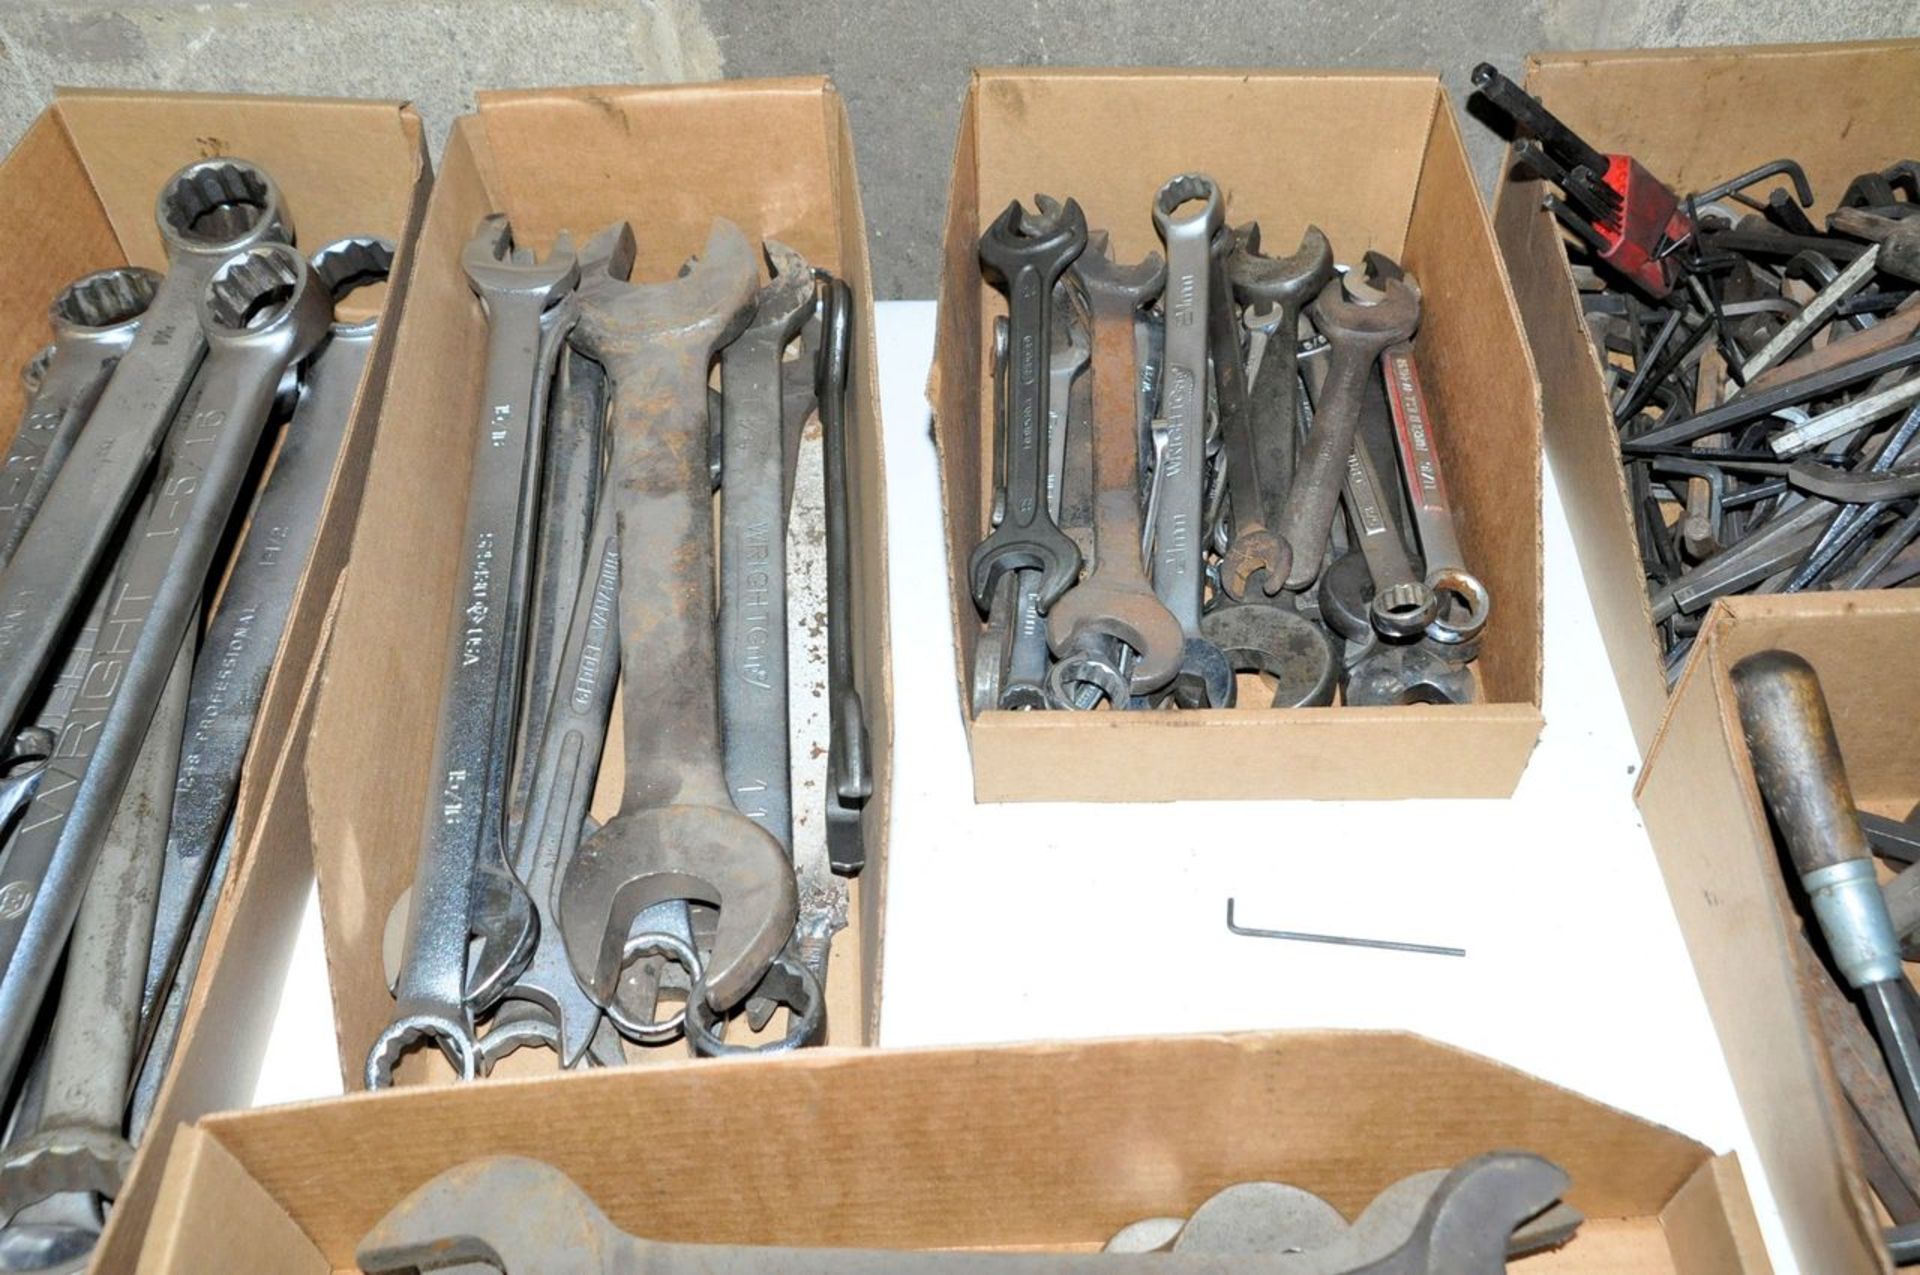 Lot - Mechanic's Wrenches in (5) Boxes, (Machine Shop) - Image 4 of 4